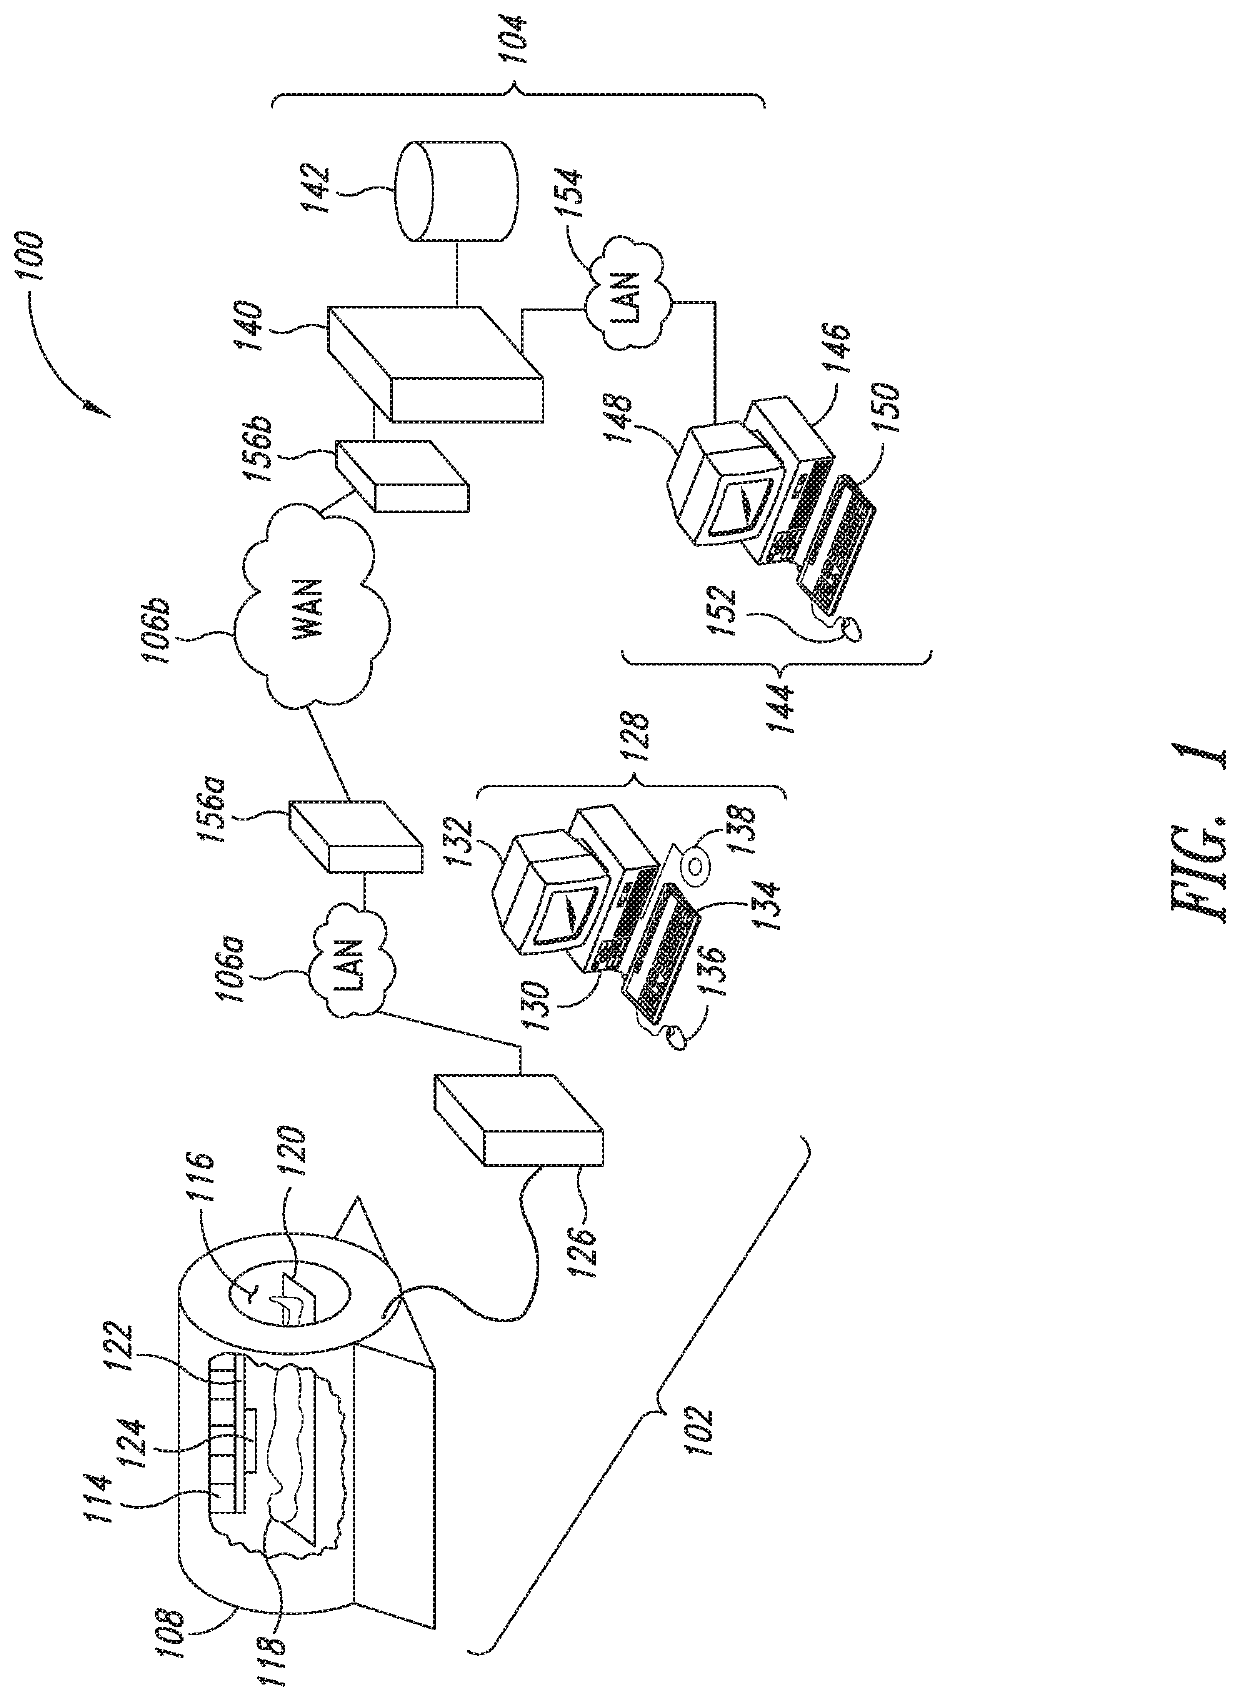 Systems and methods for longitudinally tracking fully de-identified medical studies